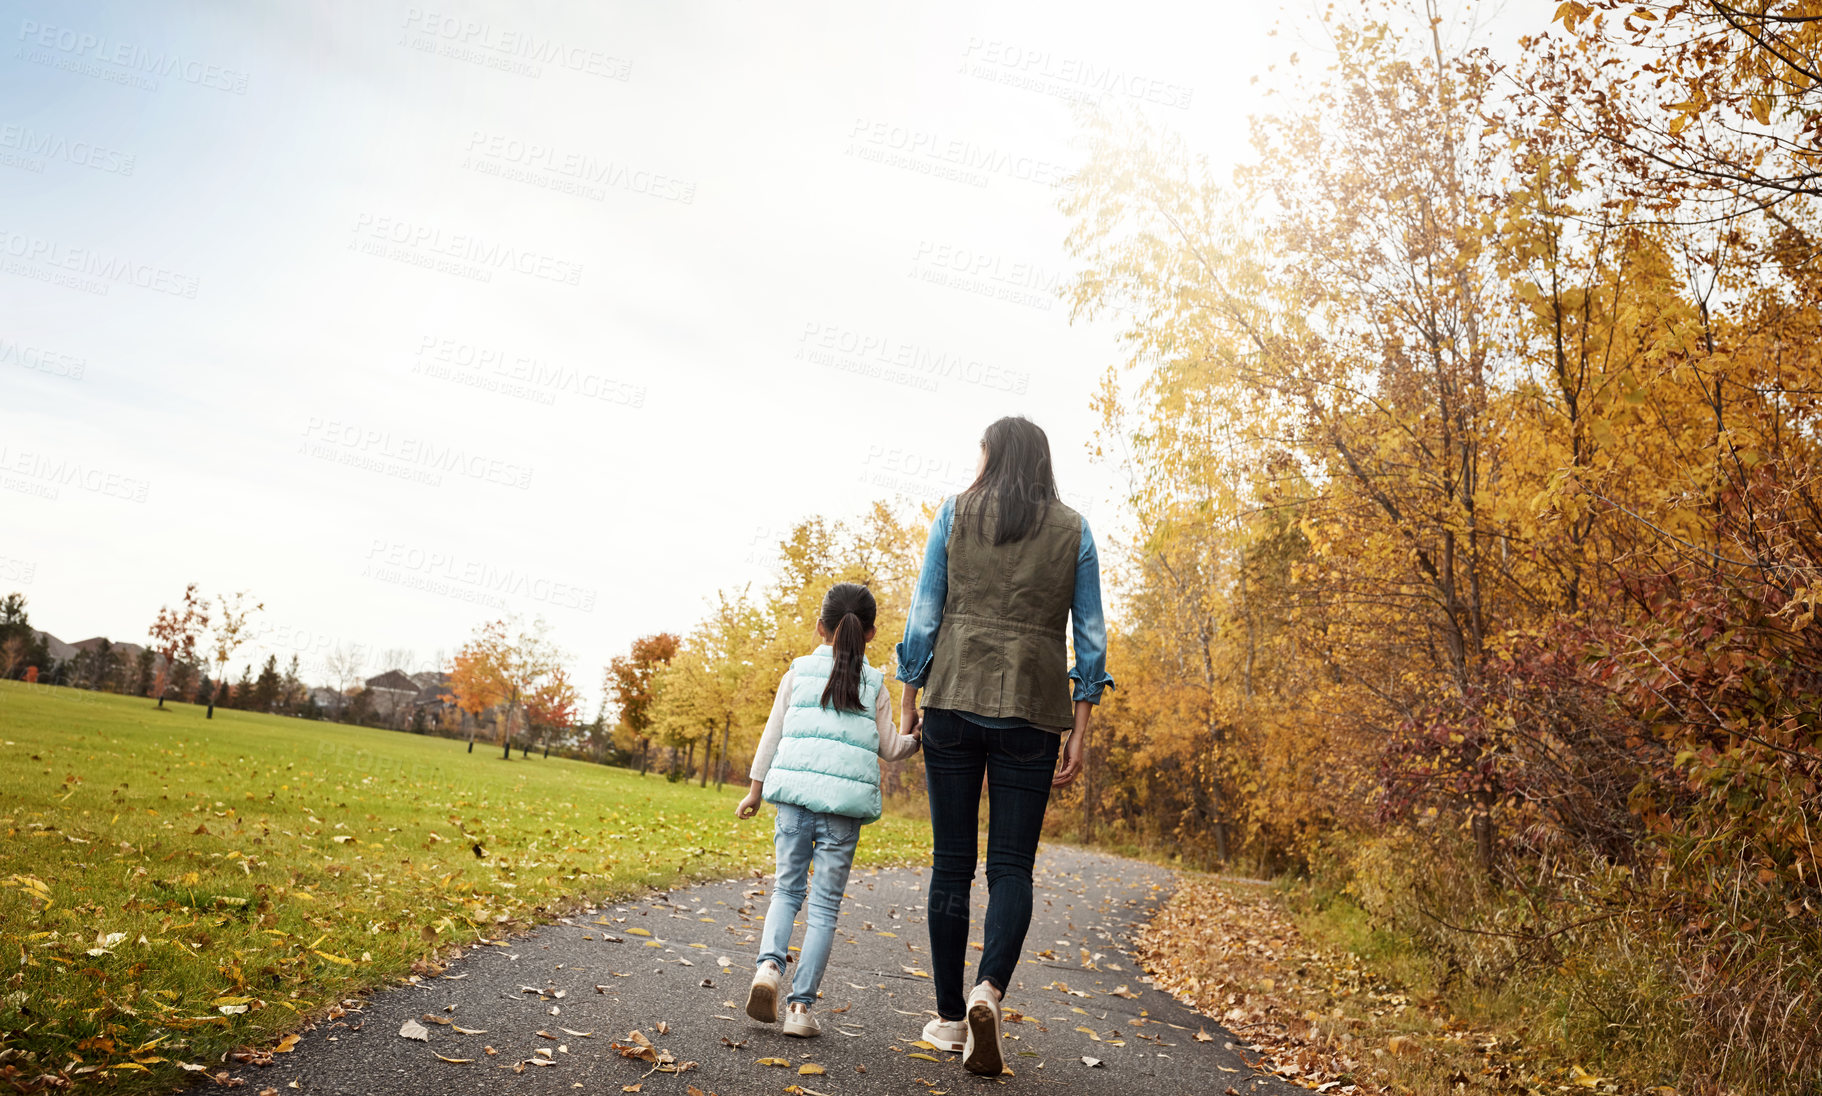 Buy stock photo Rearview shot of a mother and her little daughter enjoying a walk outdoors